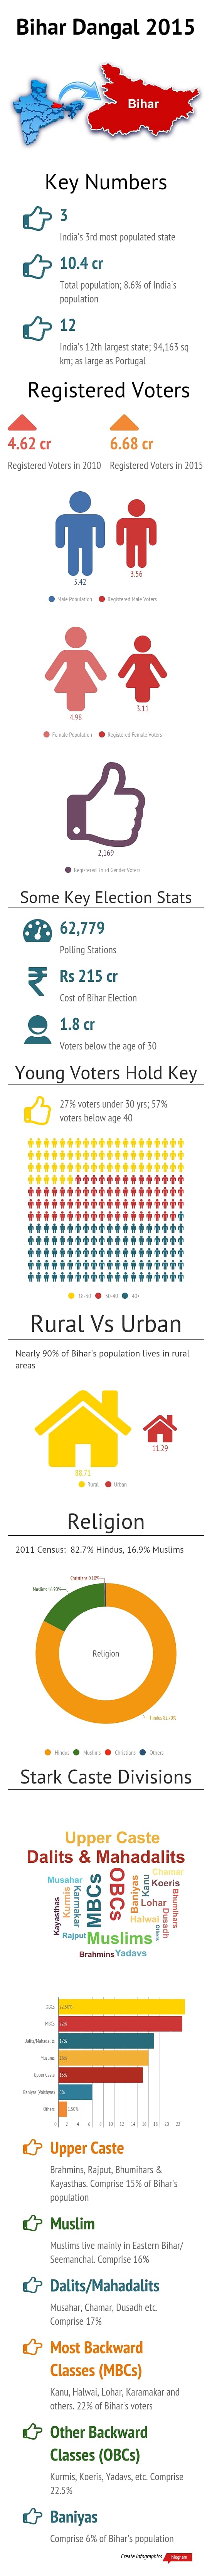 With the Bihar elections around the corner, here are some interesting facts on the state.